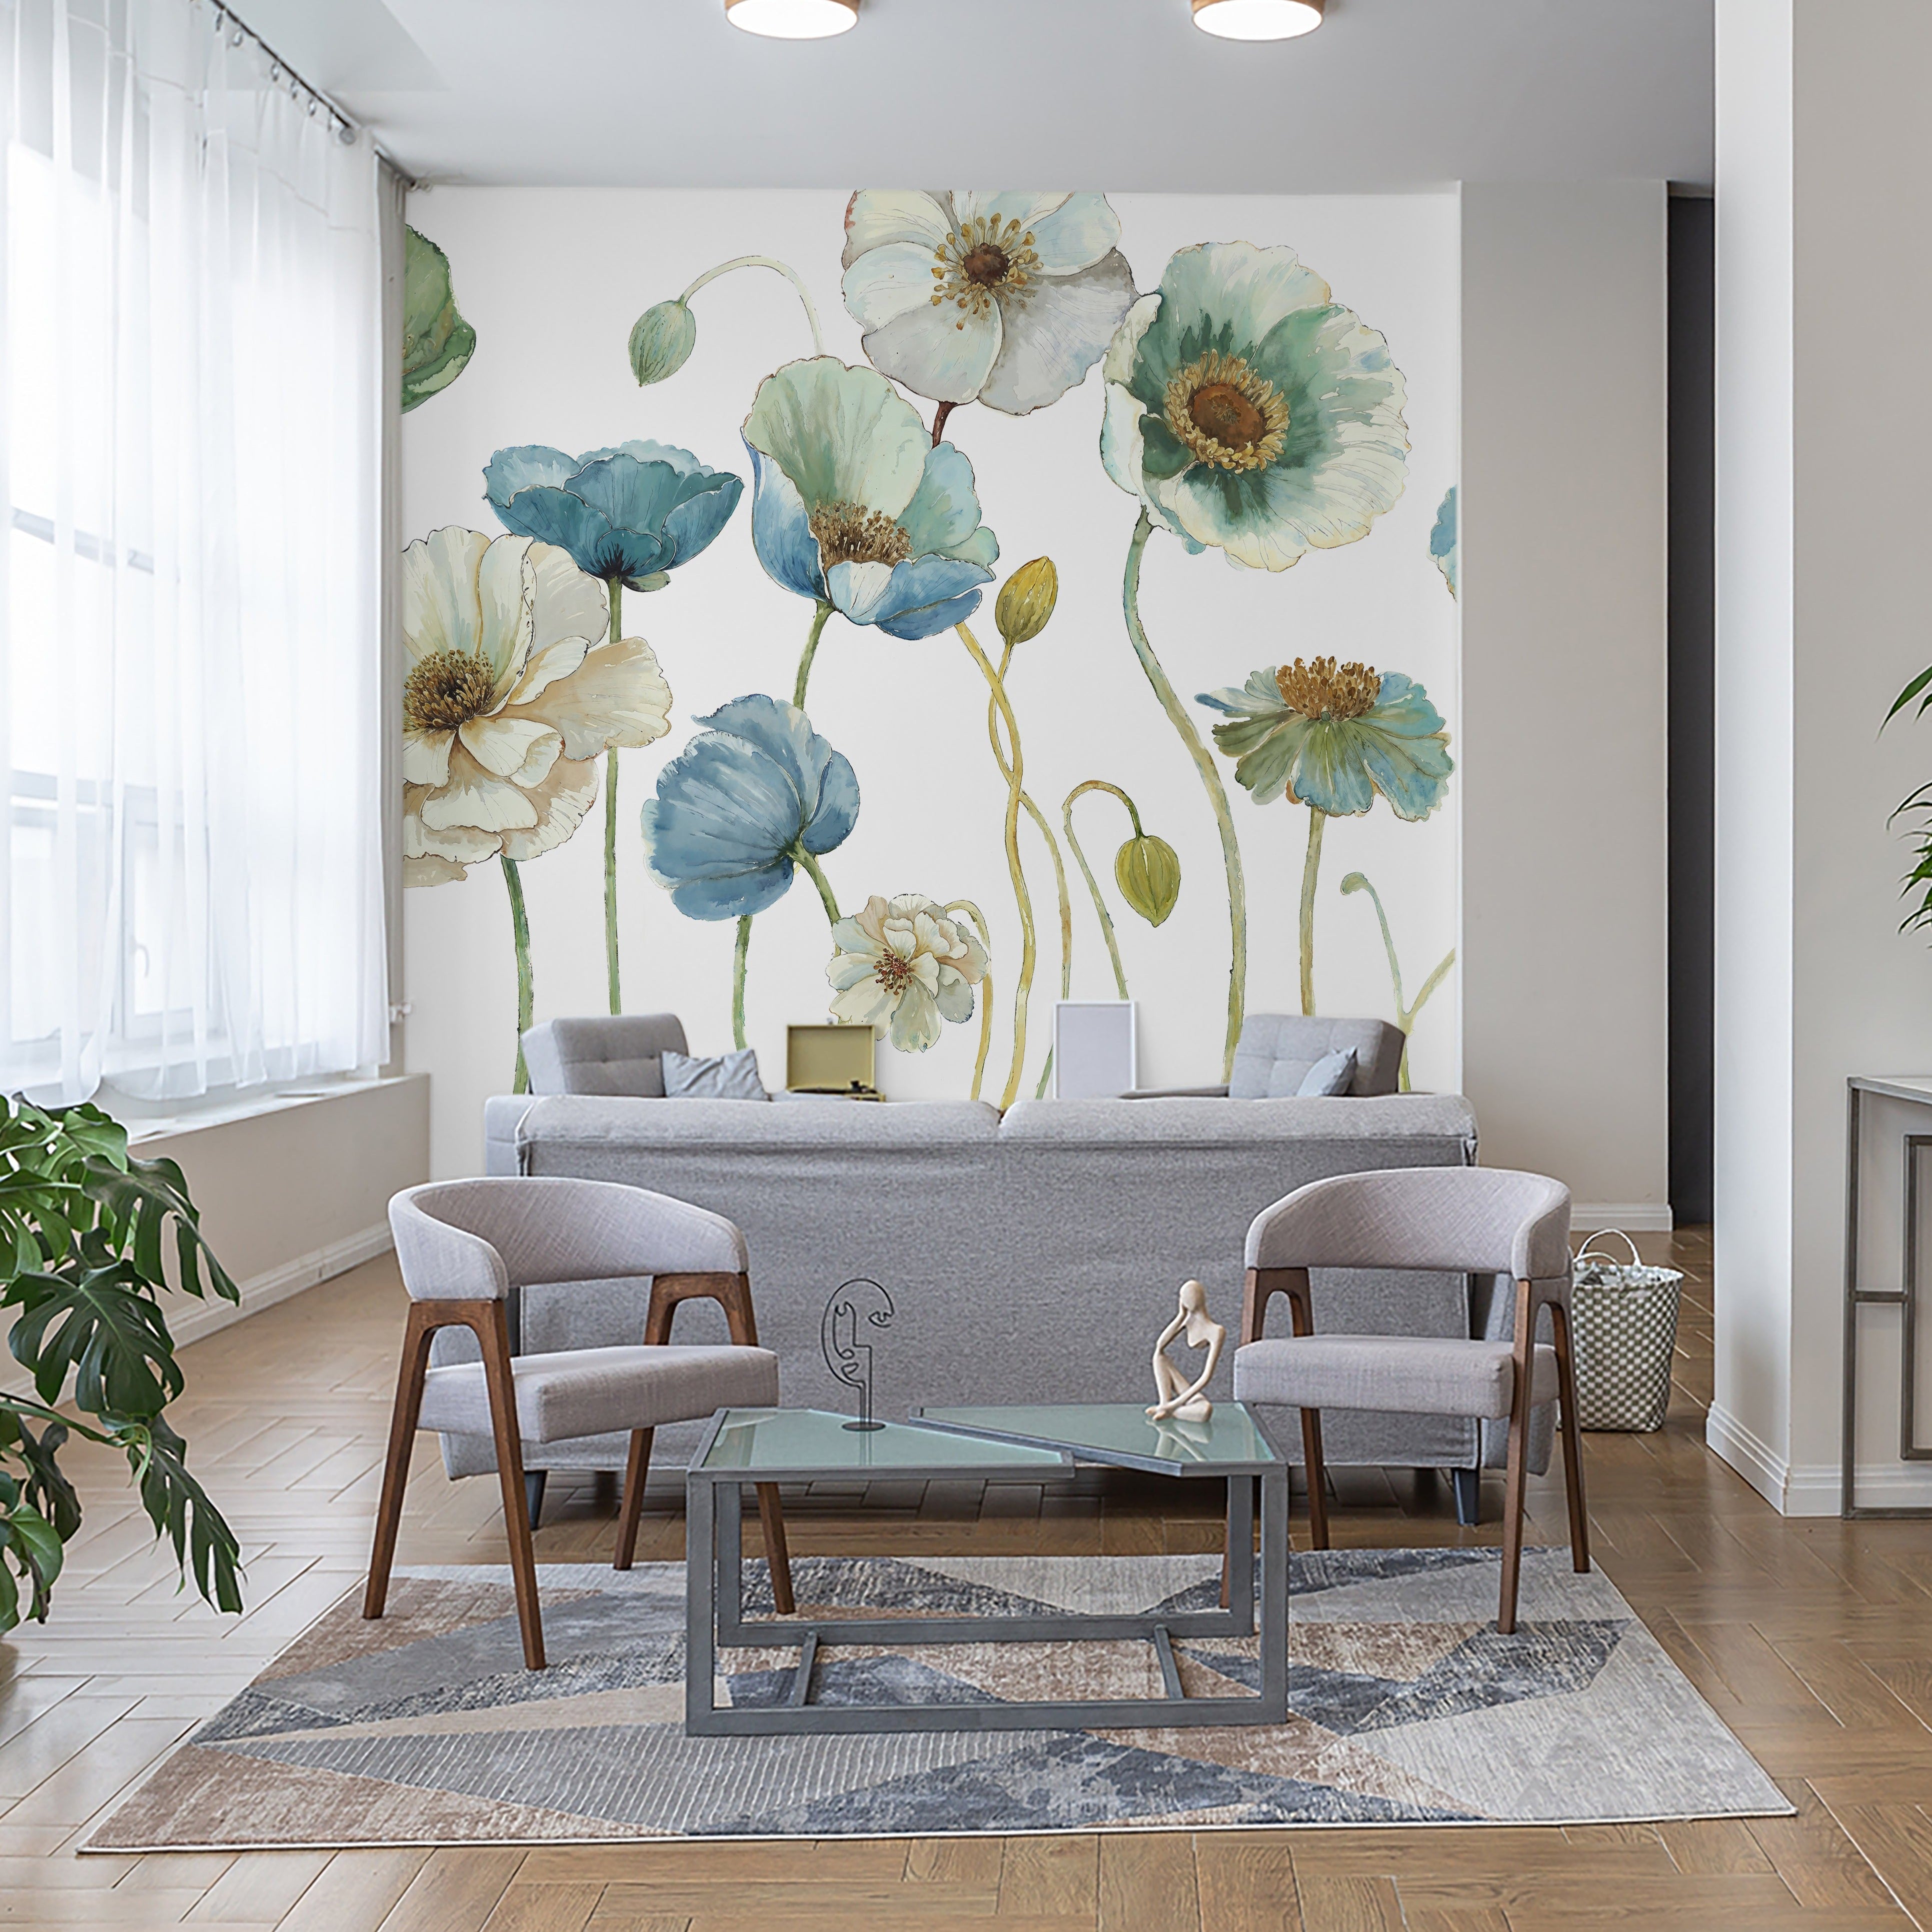 "Meadow Whispers (White) Wallpaper by Wall Blush enhancing a modern living room's decor with floral elegance."